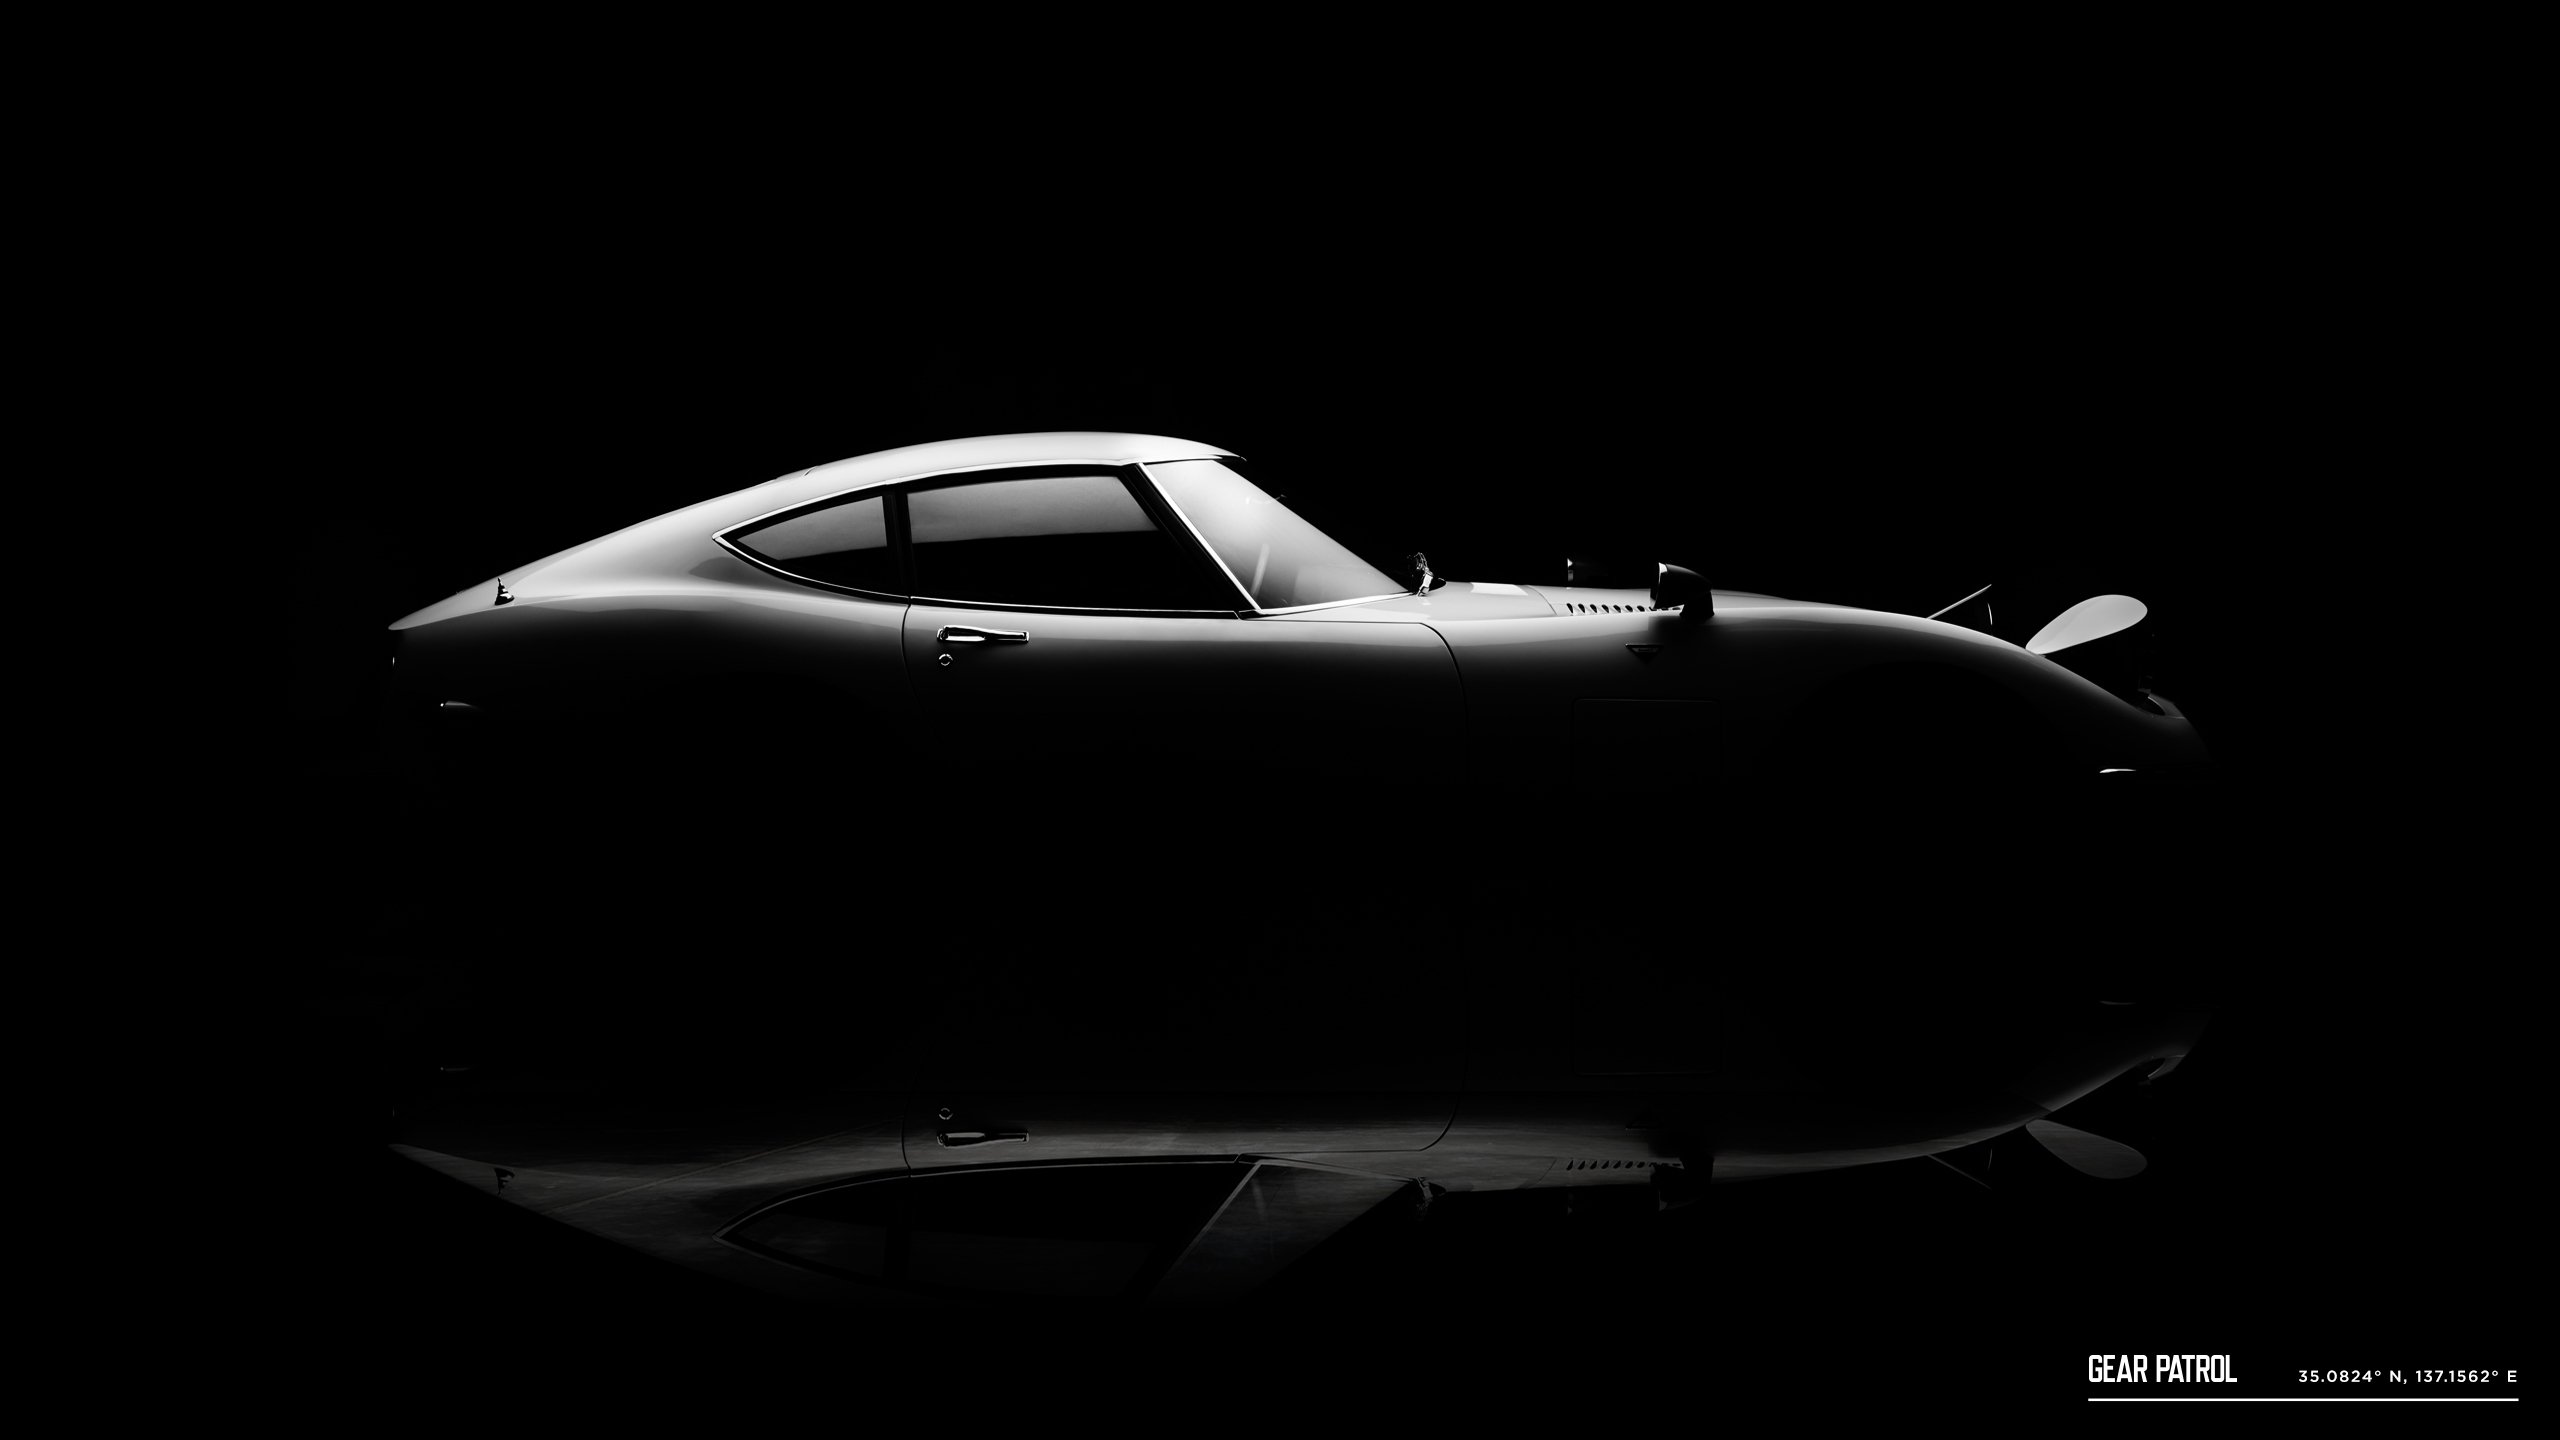 Do Yourself a Favor and Download This Toyota 2000GT Wallpaper